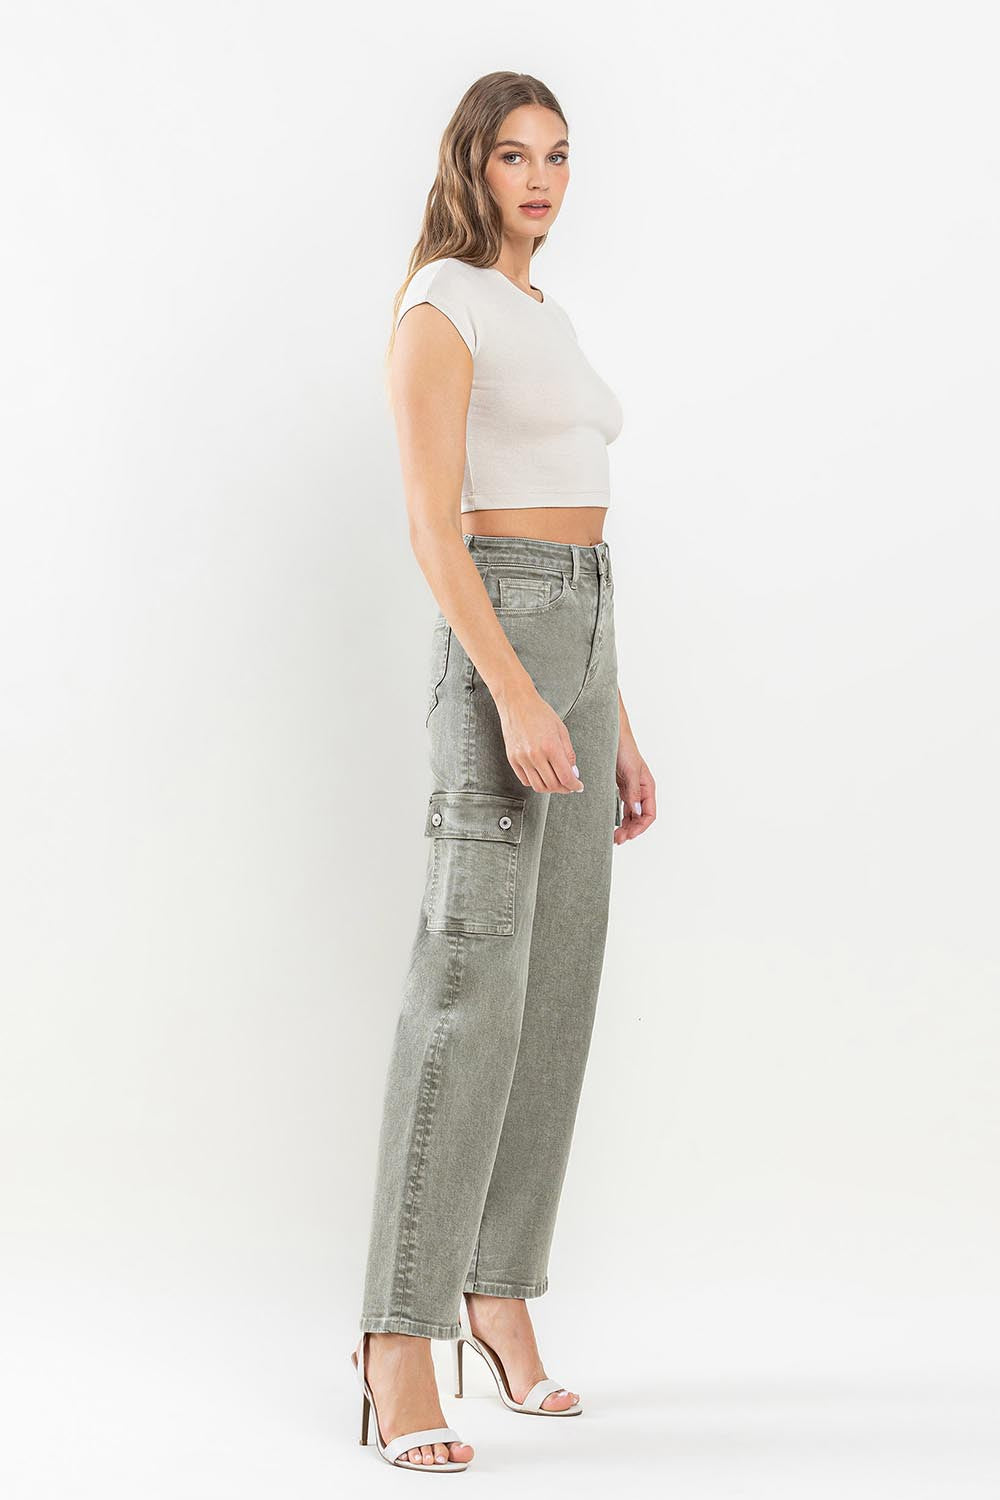 These '90s Super High Rise Loose Cargo Jeans are the epitome of vintage cool. With their ultra-high waist and loose fit, they offer a relaxed and comfortable style. The cargo pockets add an extra touch of utility and functionality.  24-32